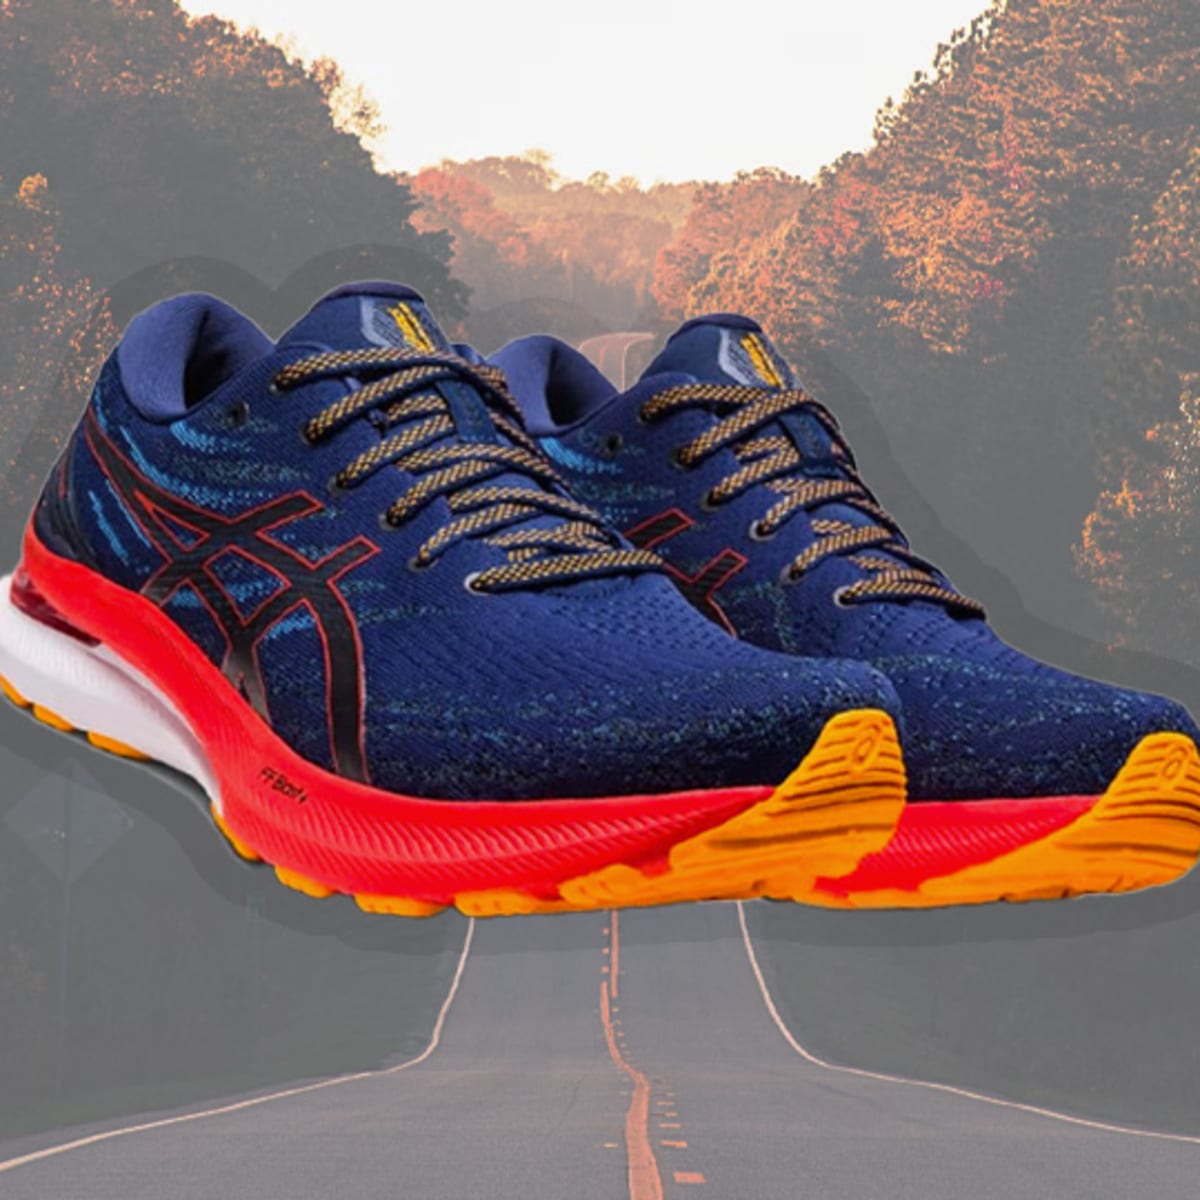 Asics' Top Running Shoe Is Still 39% Off After October Prime Day